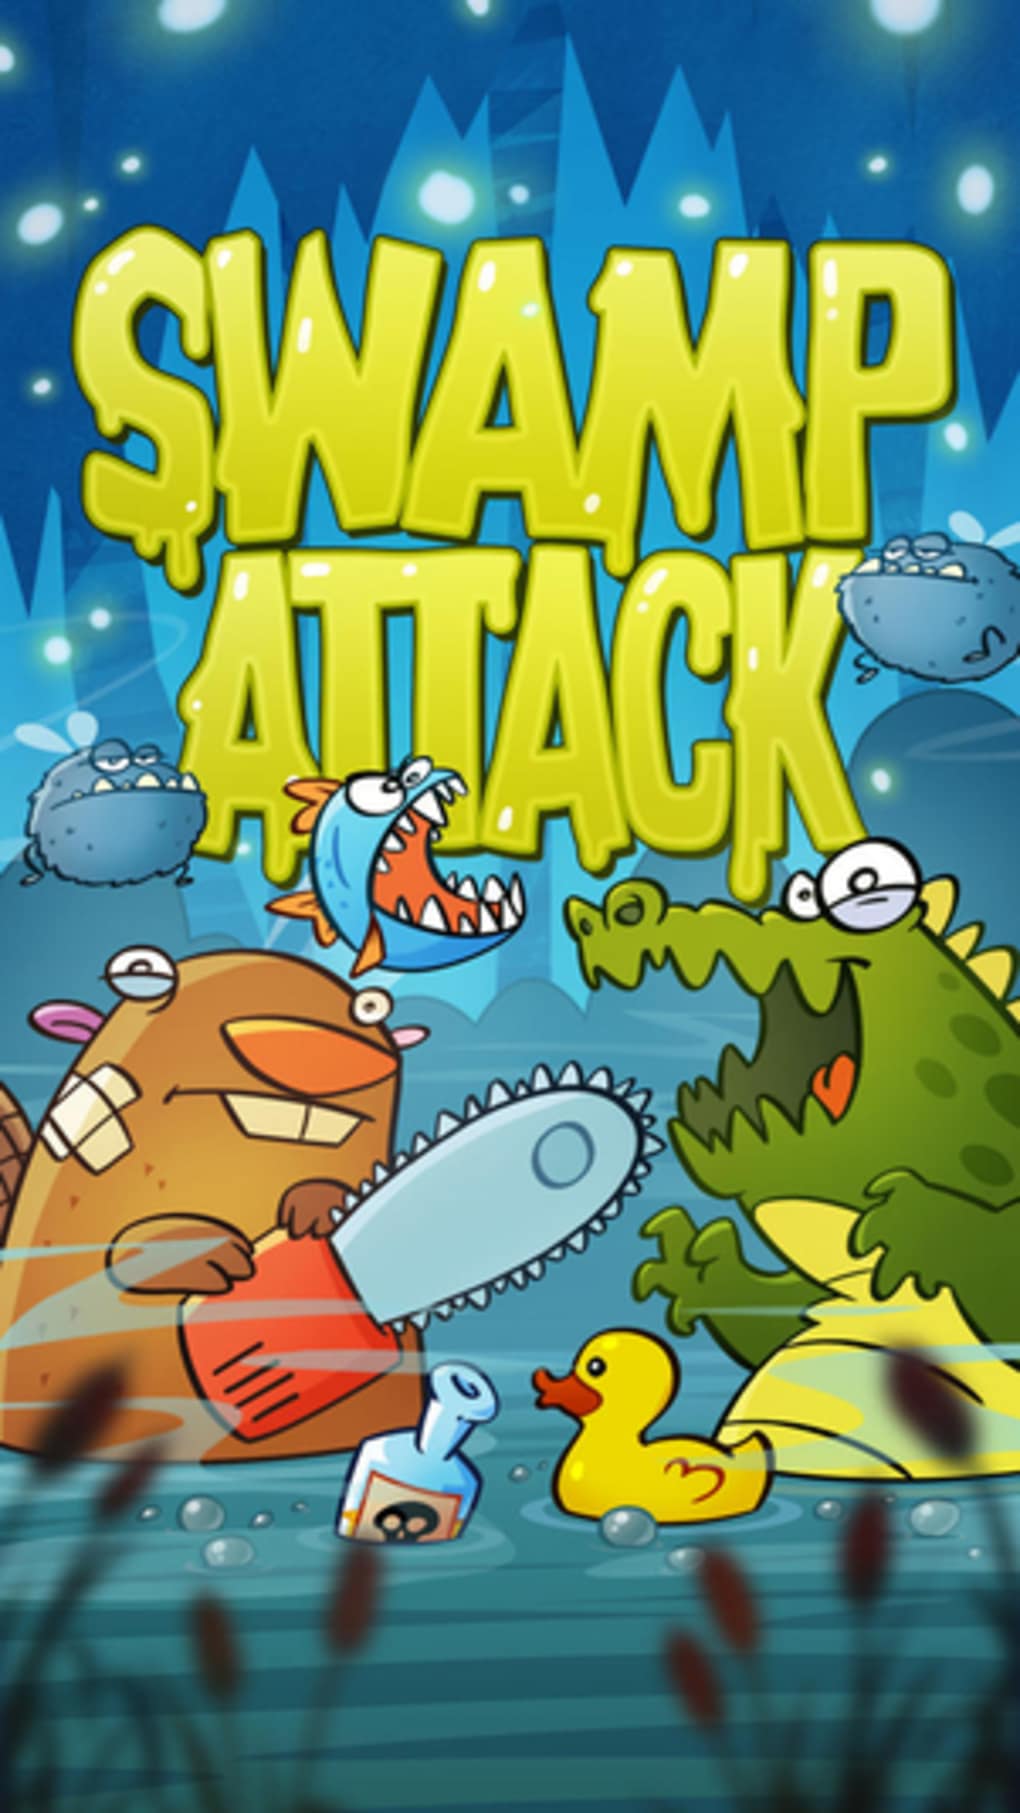 download the new version for apple Swamp Attack 2